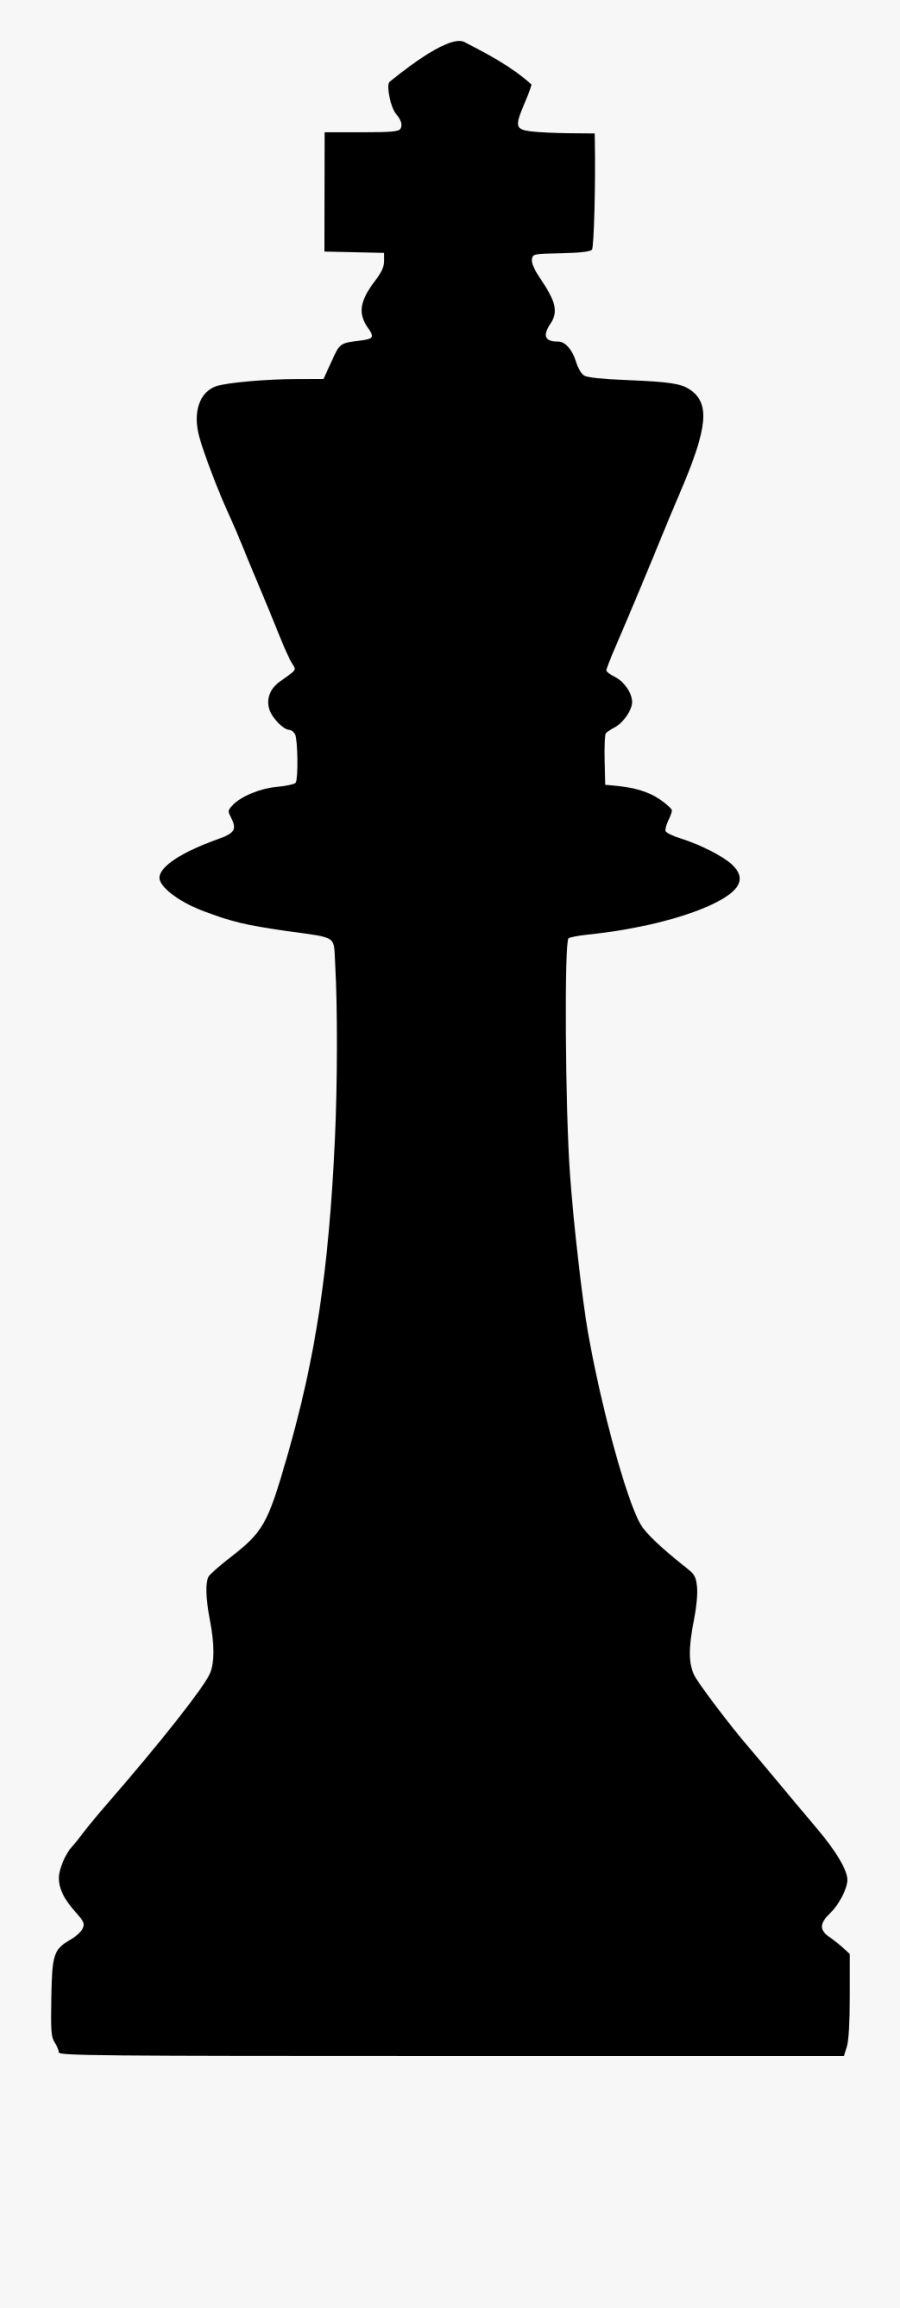 Clipart - Silhouette King Chess Piece , Free Transparent Clipart ...